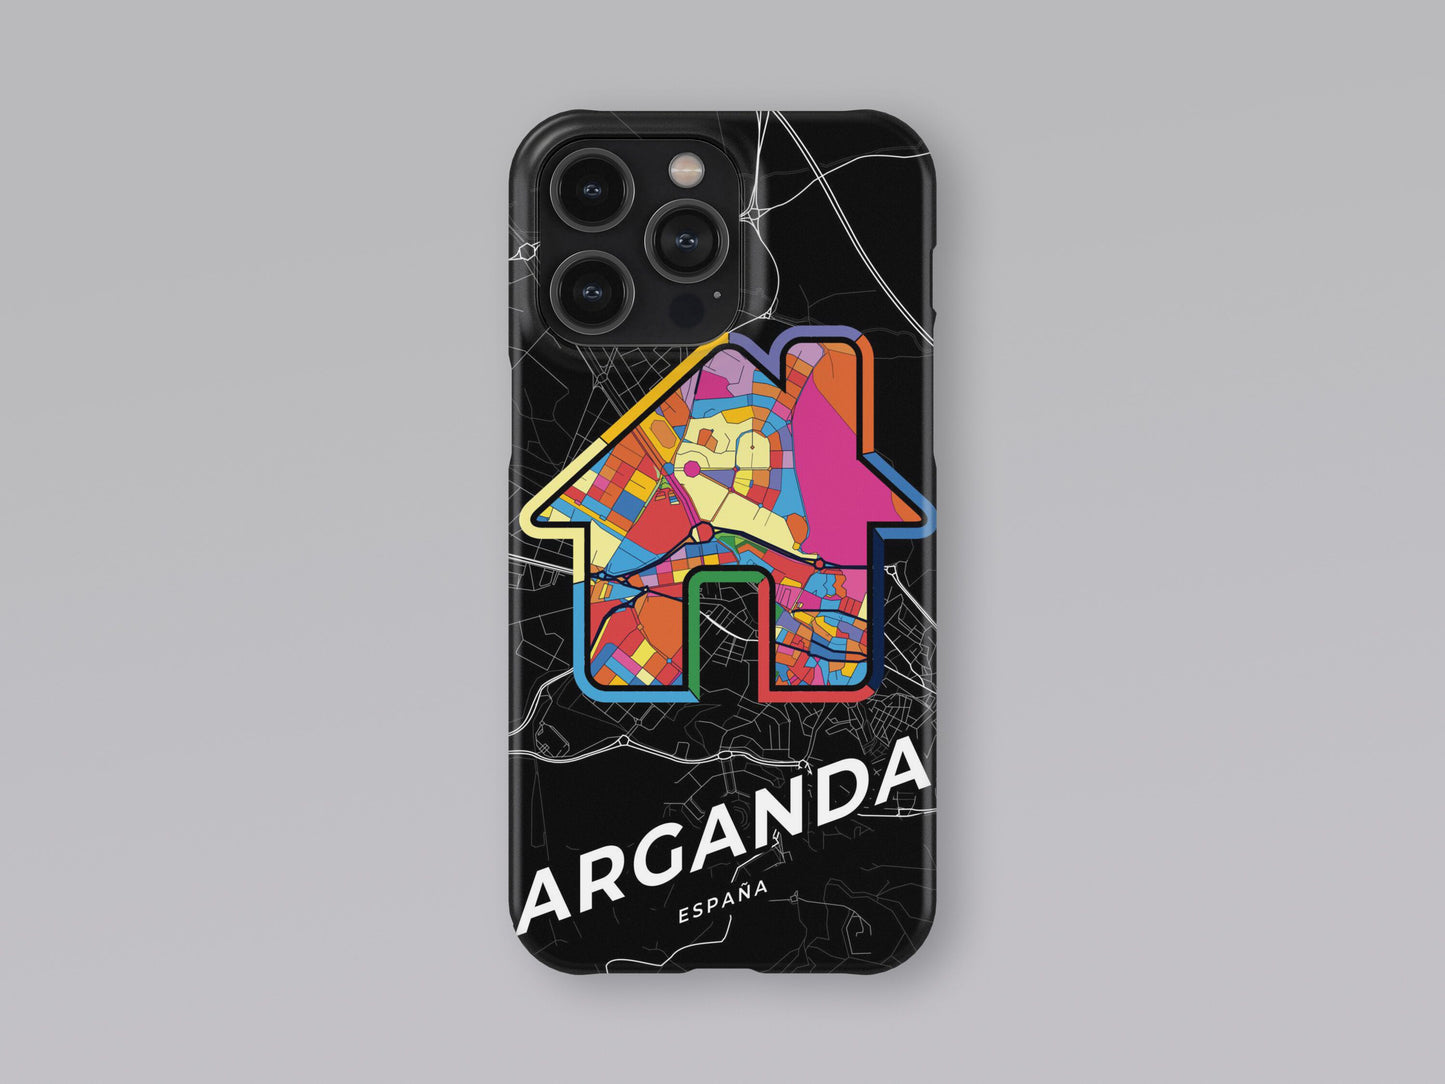 Arganda Spain slim phone case with colorful icon. Birthday, wedding or housewarming gift. Couple match cases. 3